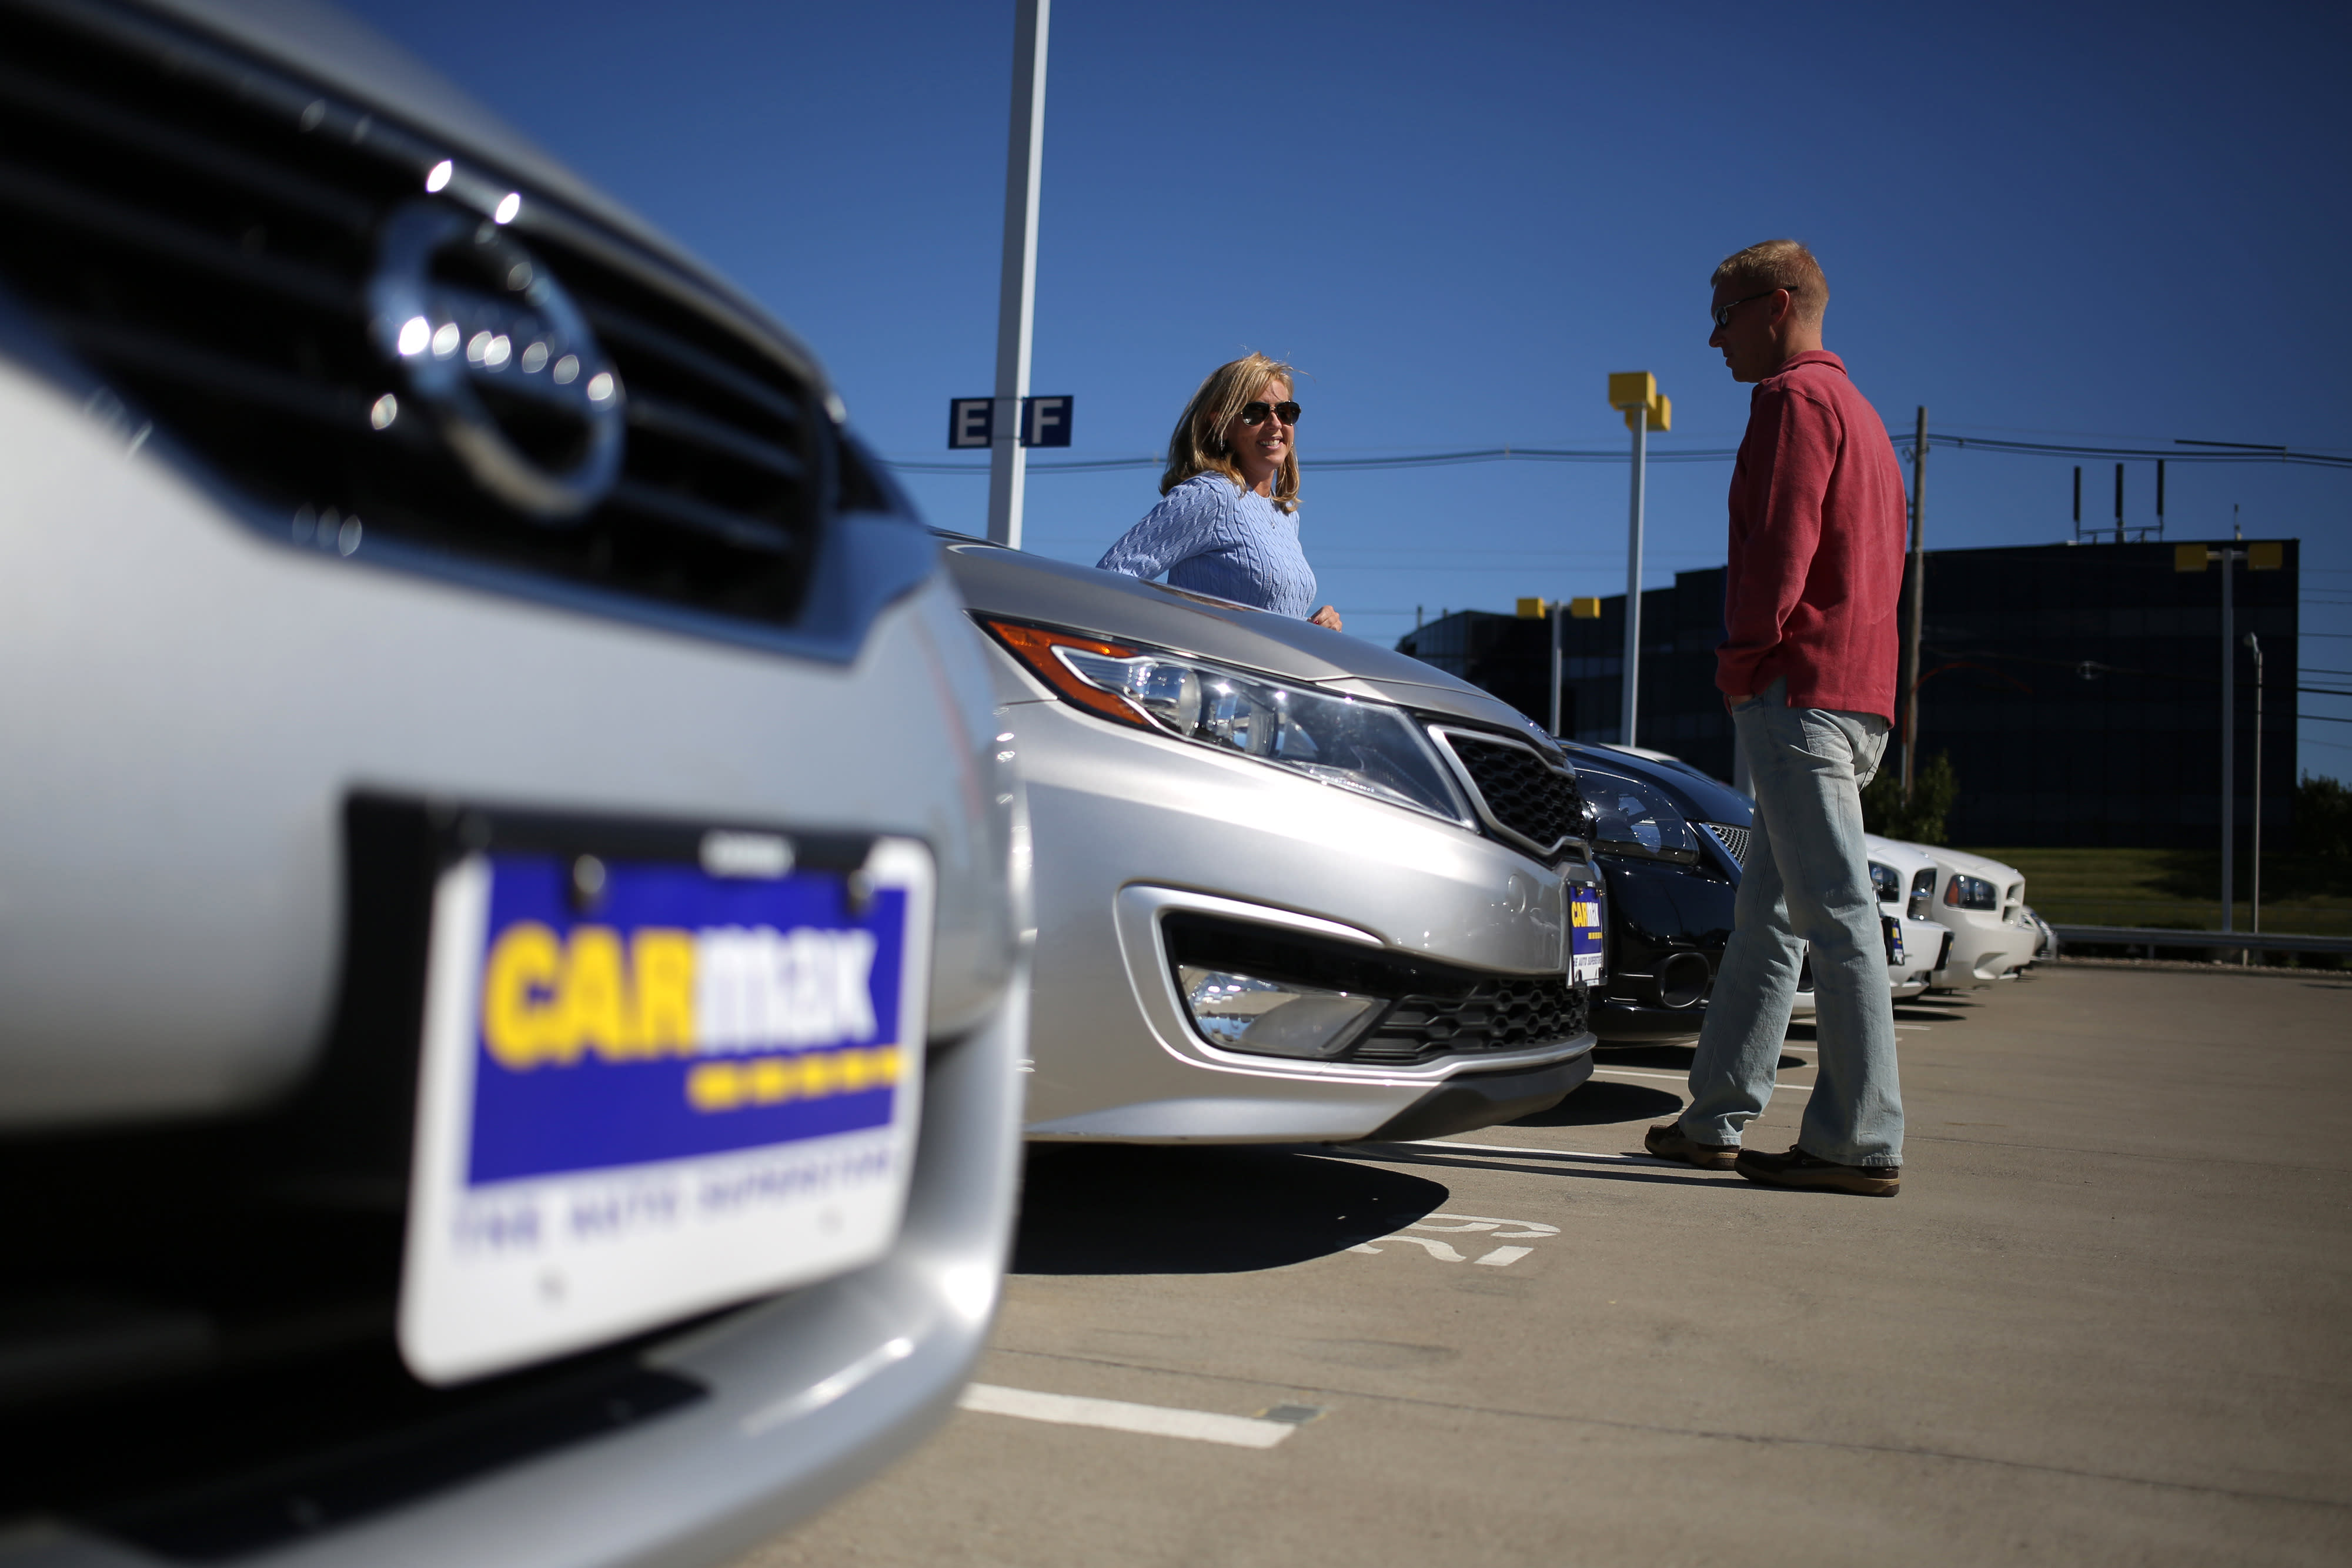 CarMax shares crater as its huge earnings miss signals an end to the used car boom